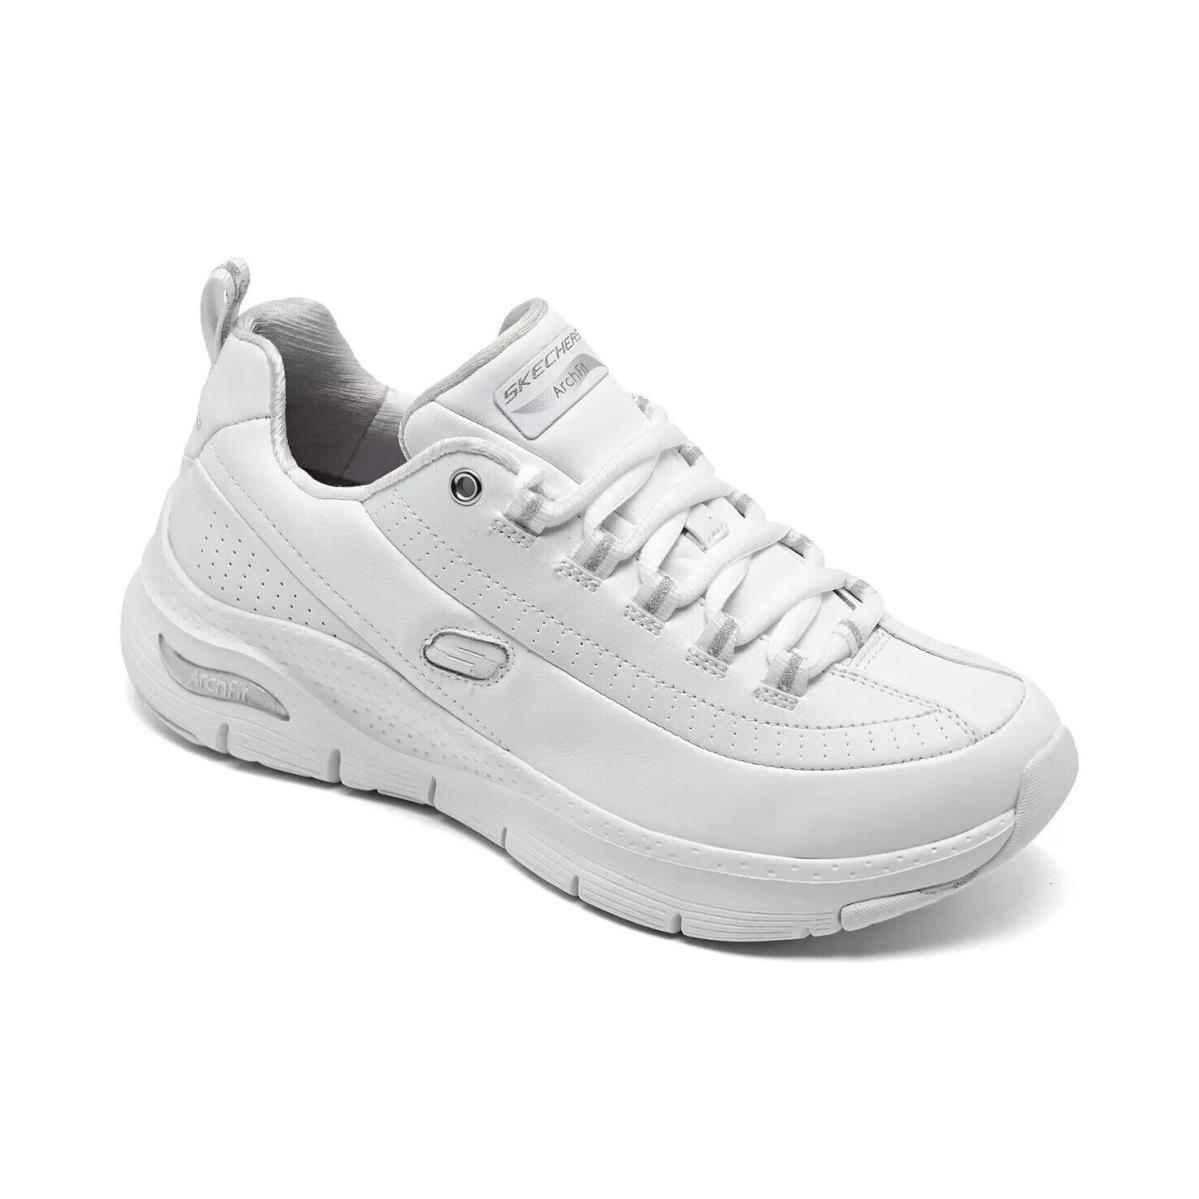 Skechers N5321 Women s White Sport Arch Fit-citi Drive Athletic Shoes Size 8 W